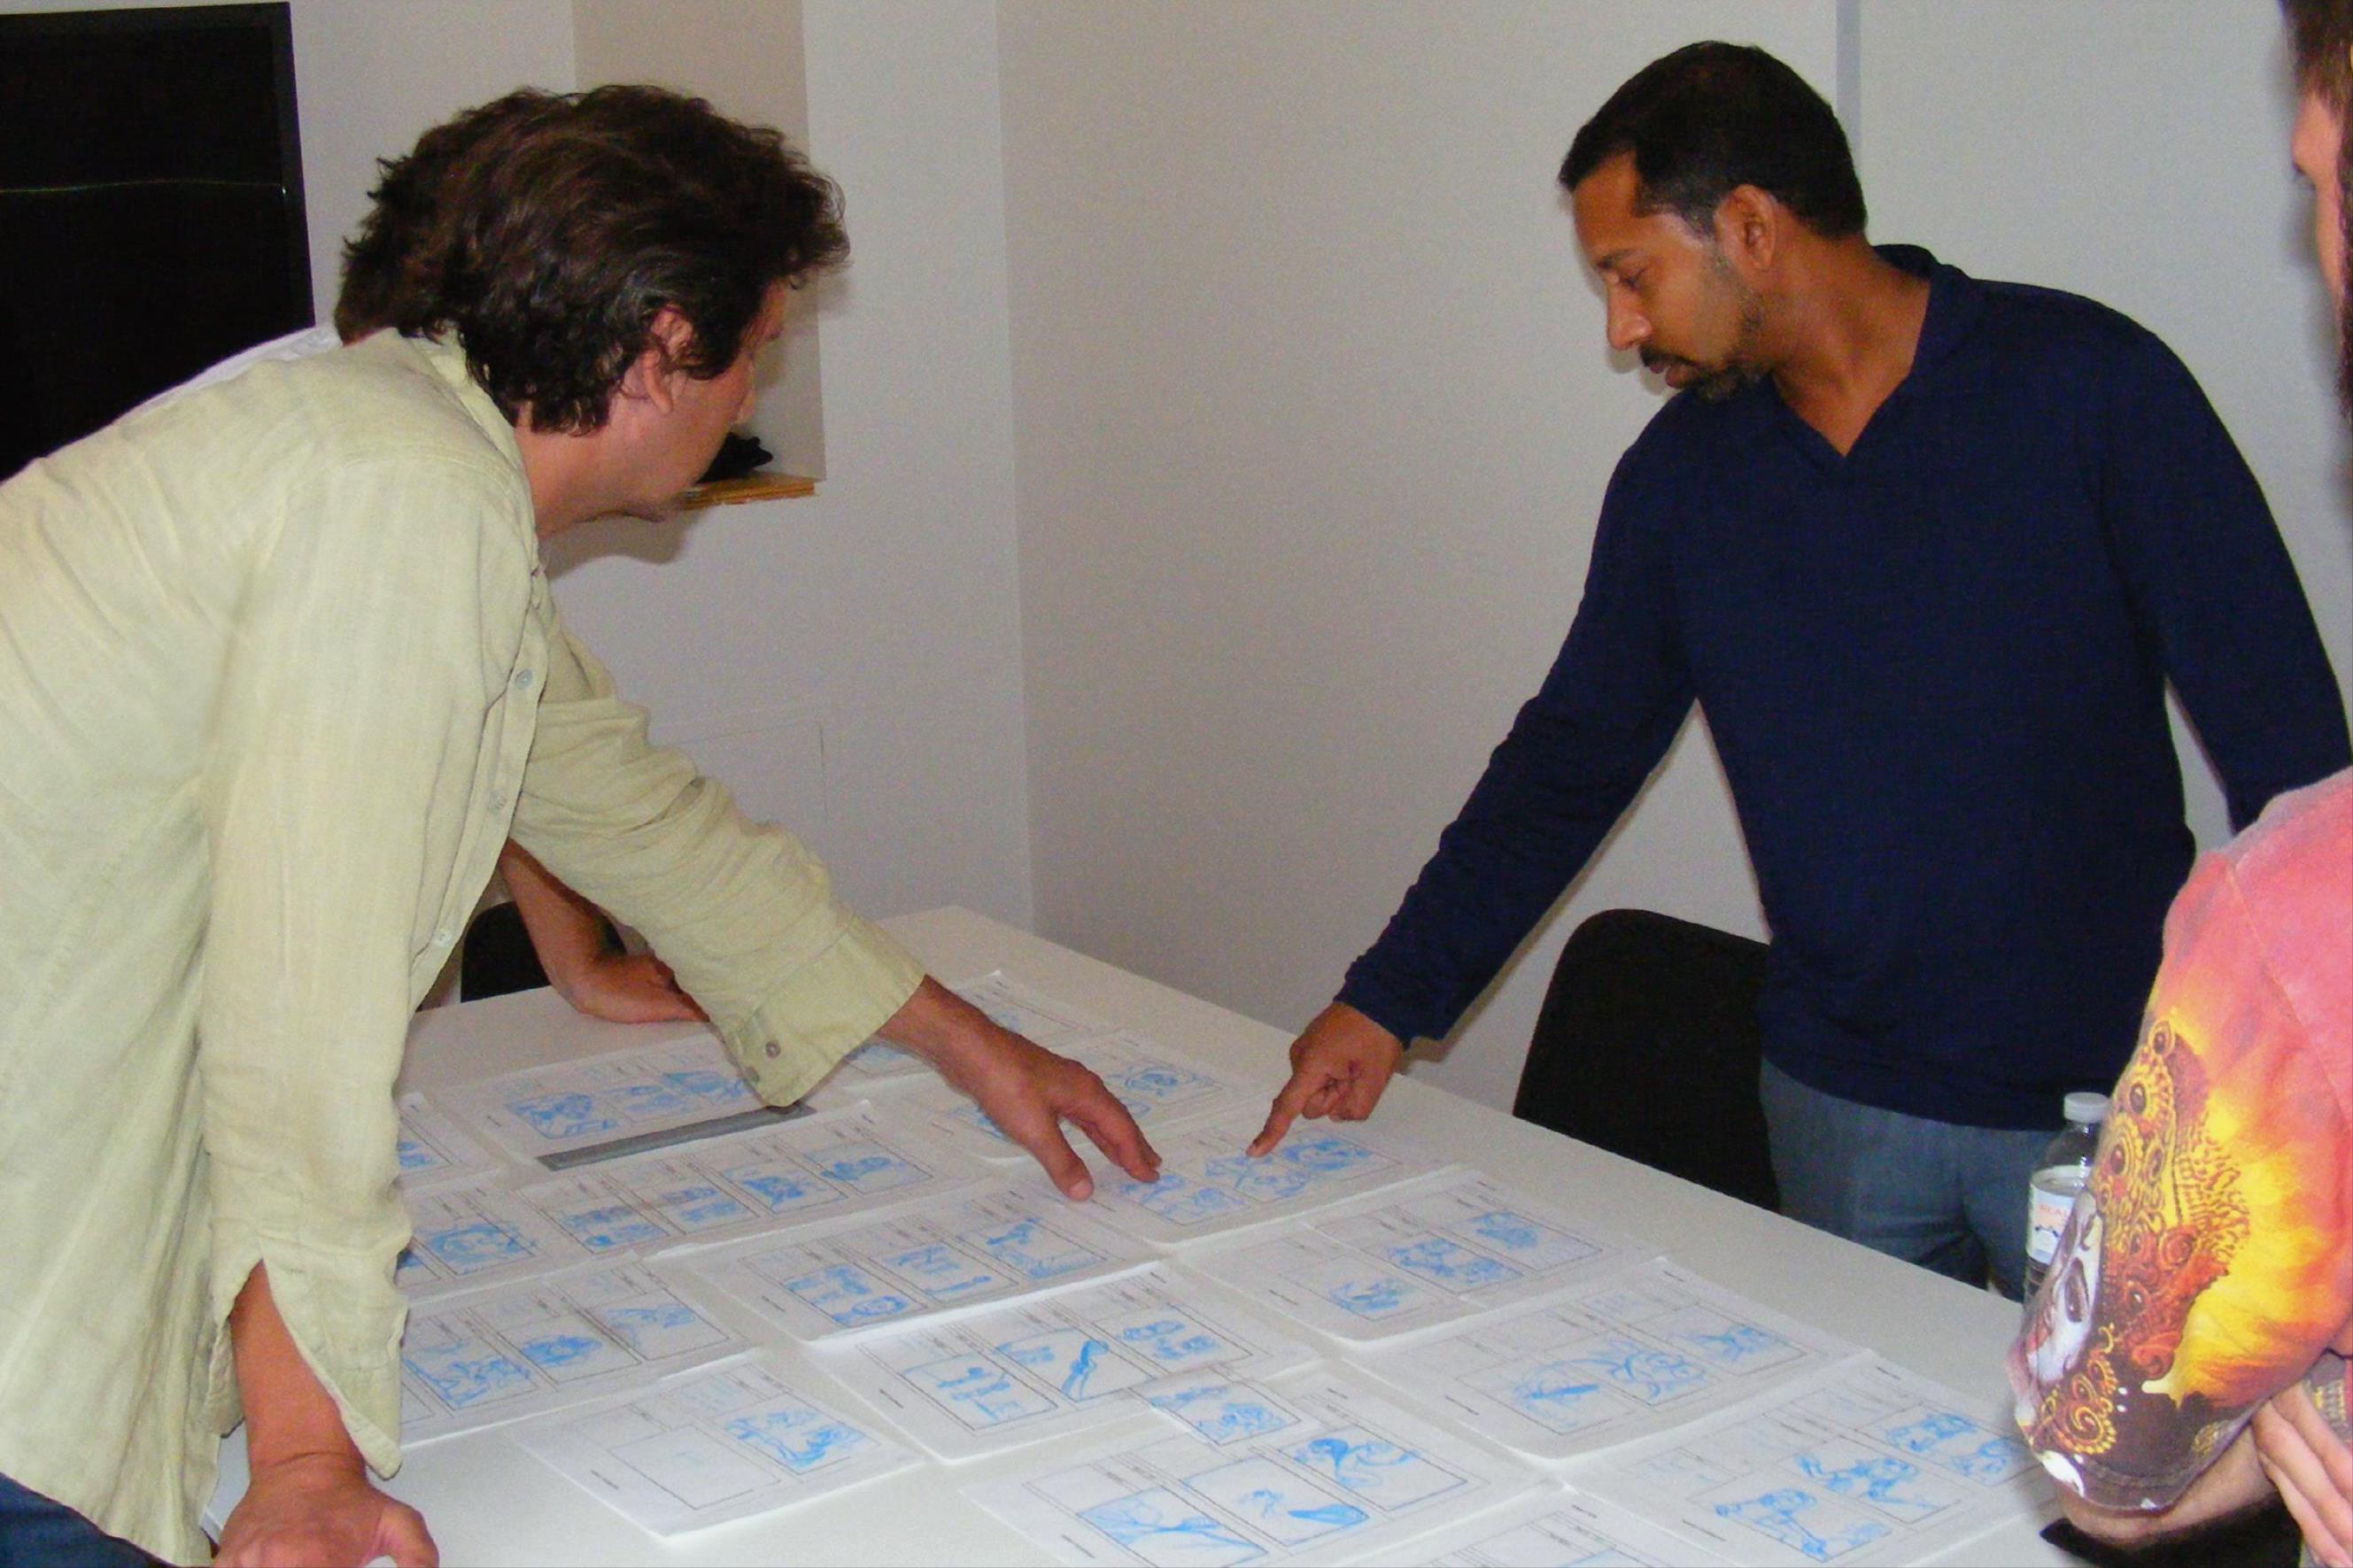 Stephen Lategan reviews storyboards for a television project (2013)